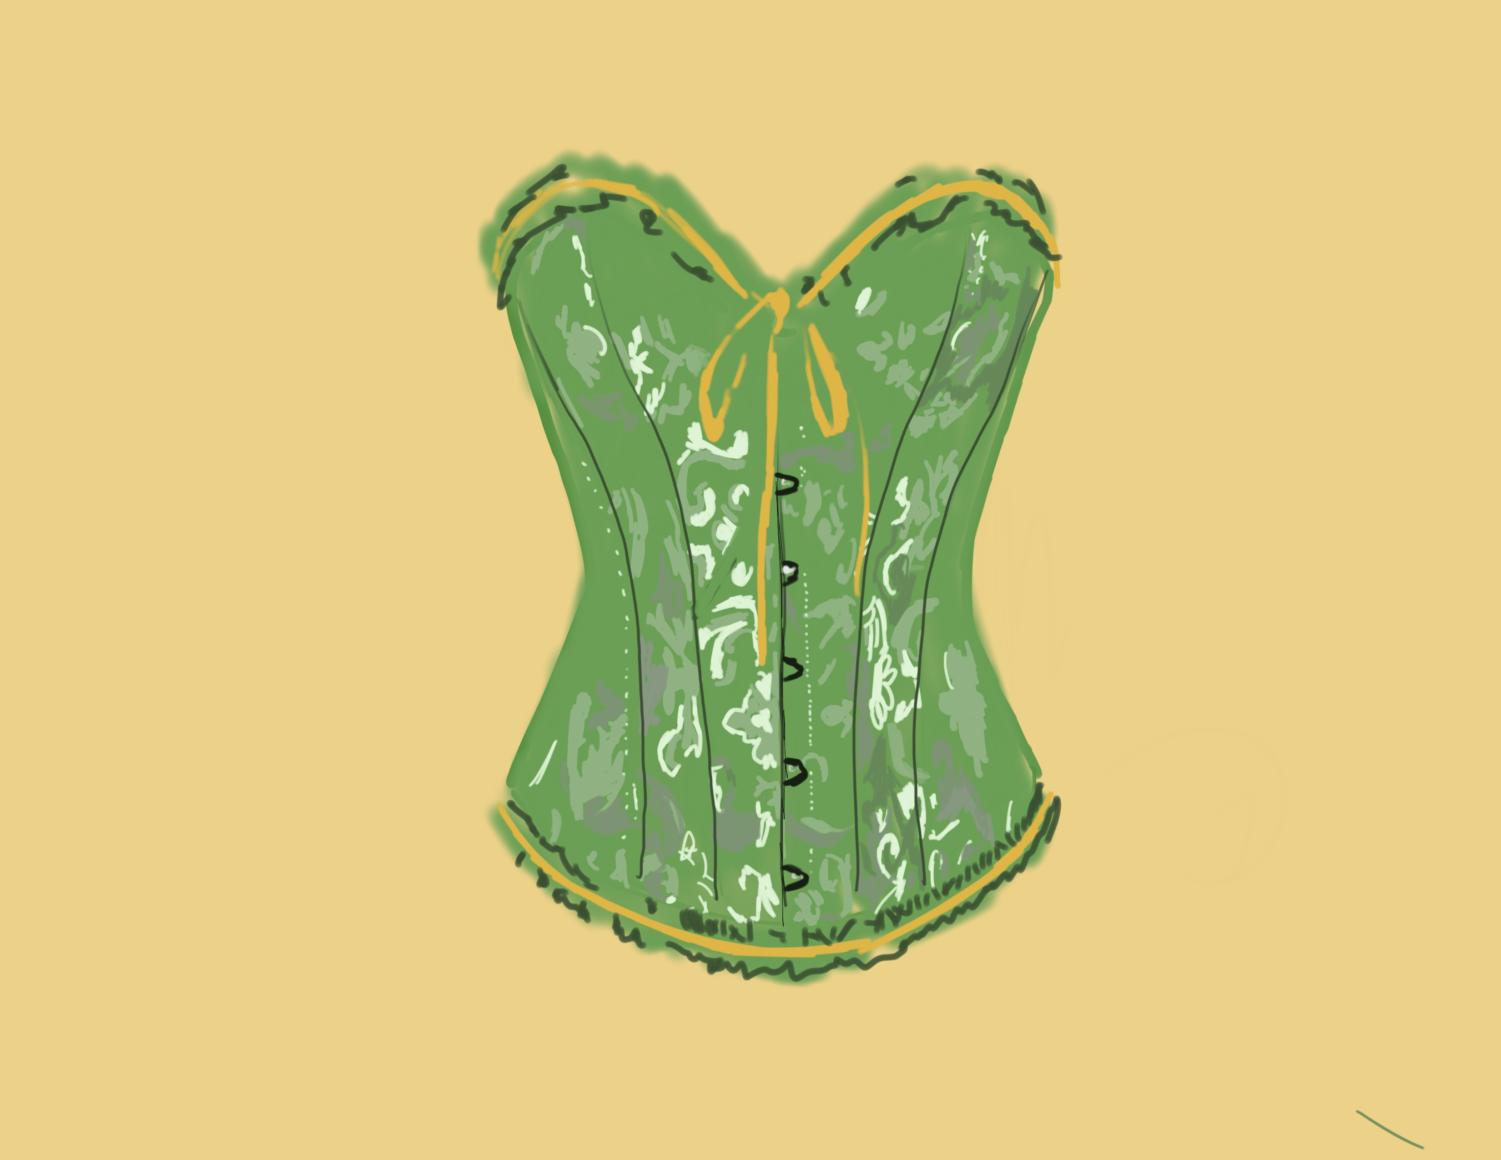 The history behind corsets: how a piece of clothing sparked controversy,  criticism and empowerment – The Wildcat Tribune